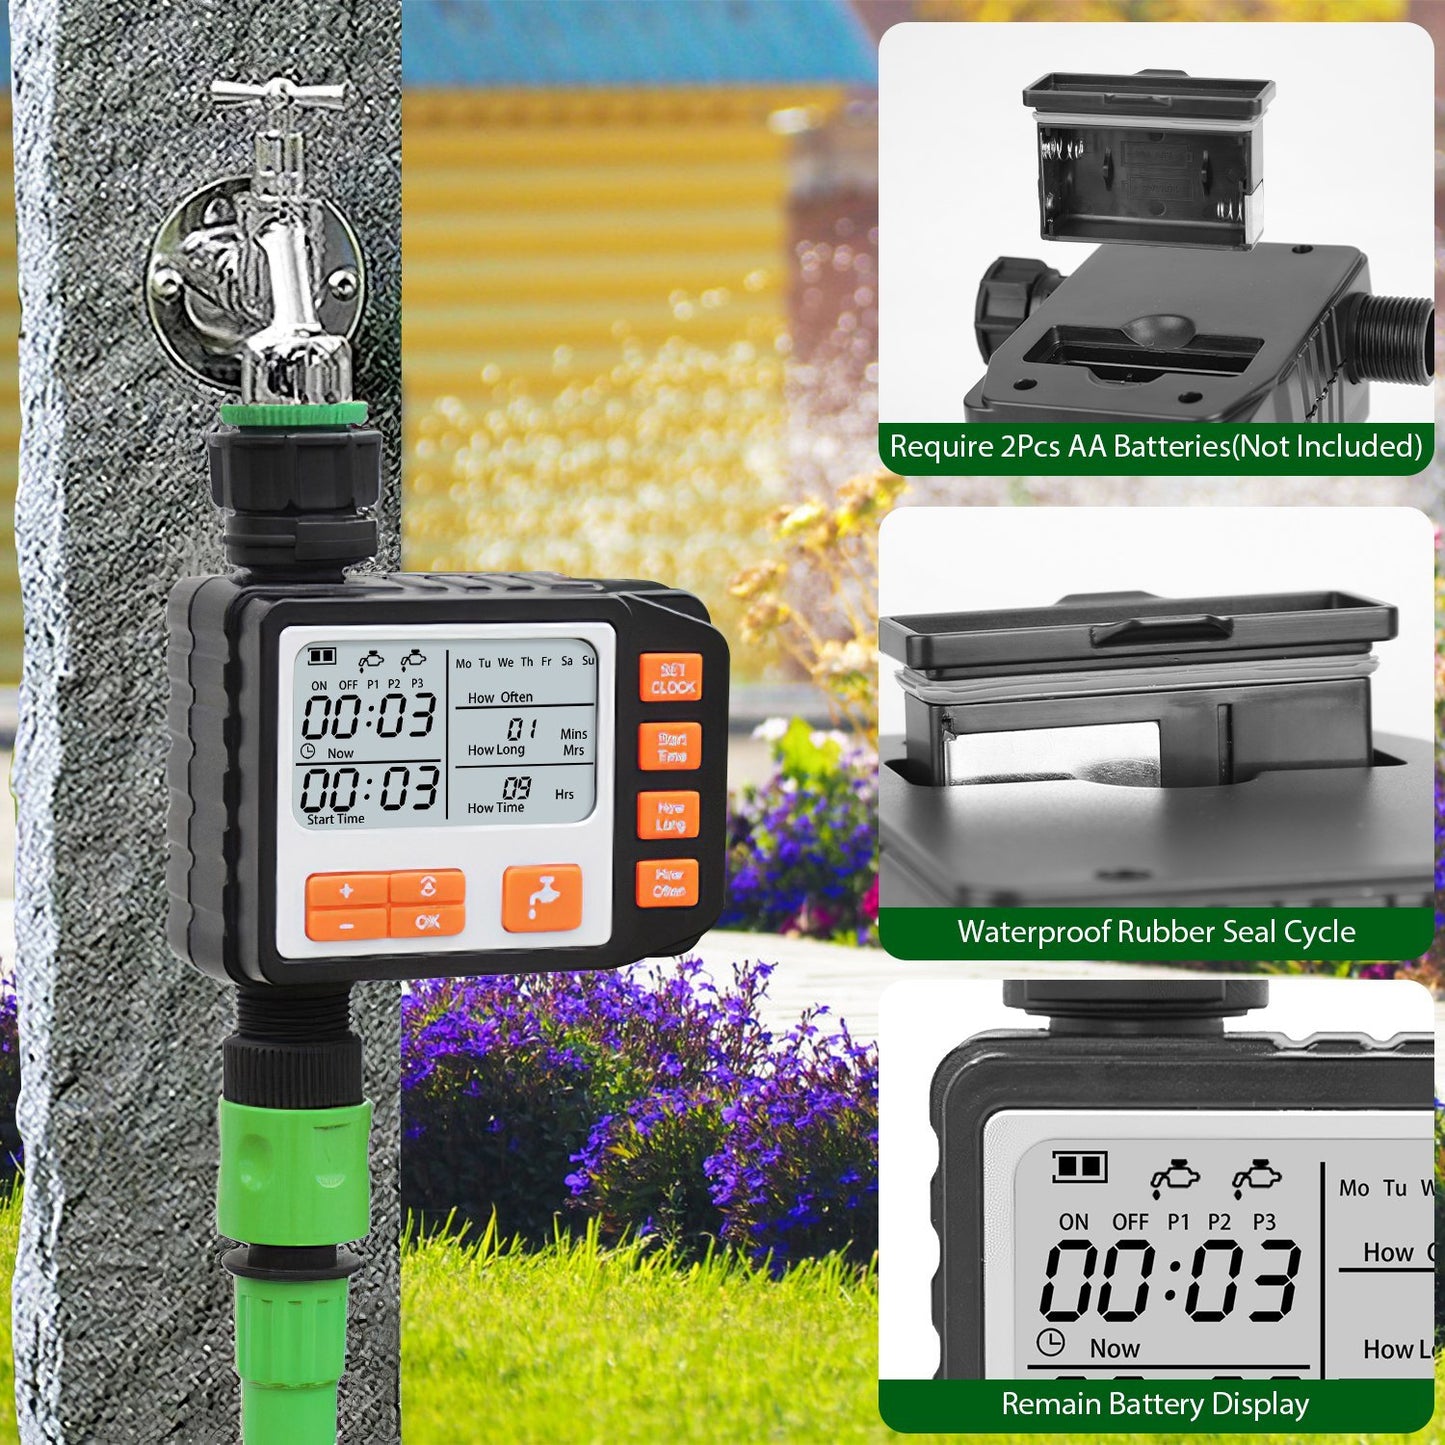 Sprinkler Timer with 3 Watering Programs Manual Mode Automatic Watering System Waterproof Irrigation Timer House Faucet Timer For Garden Yard Lawn